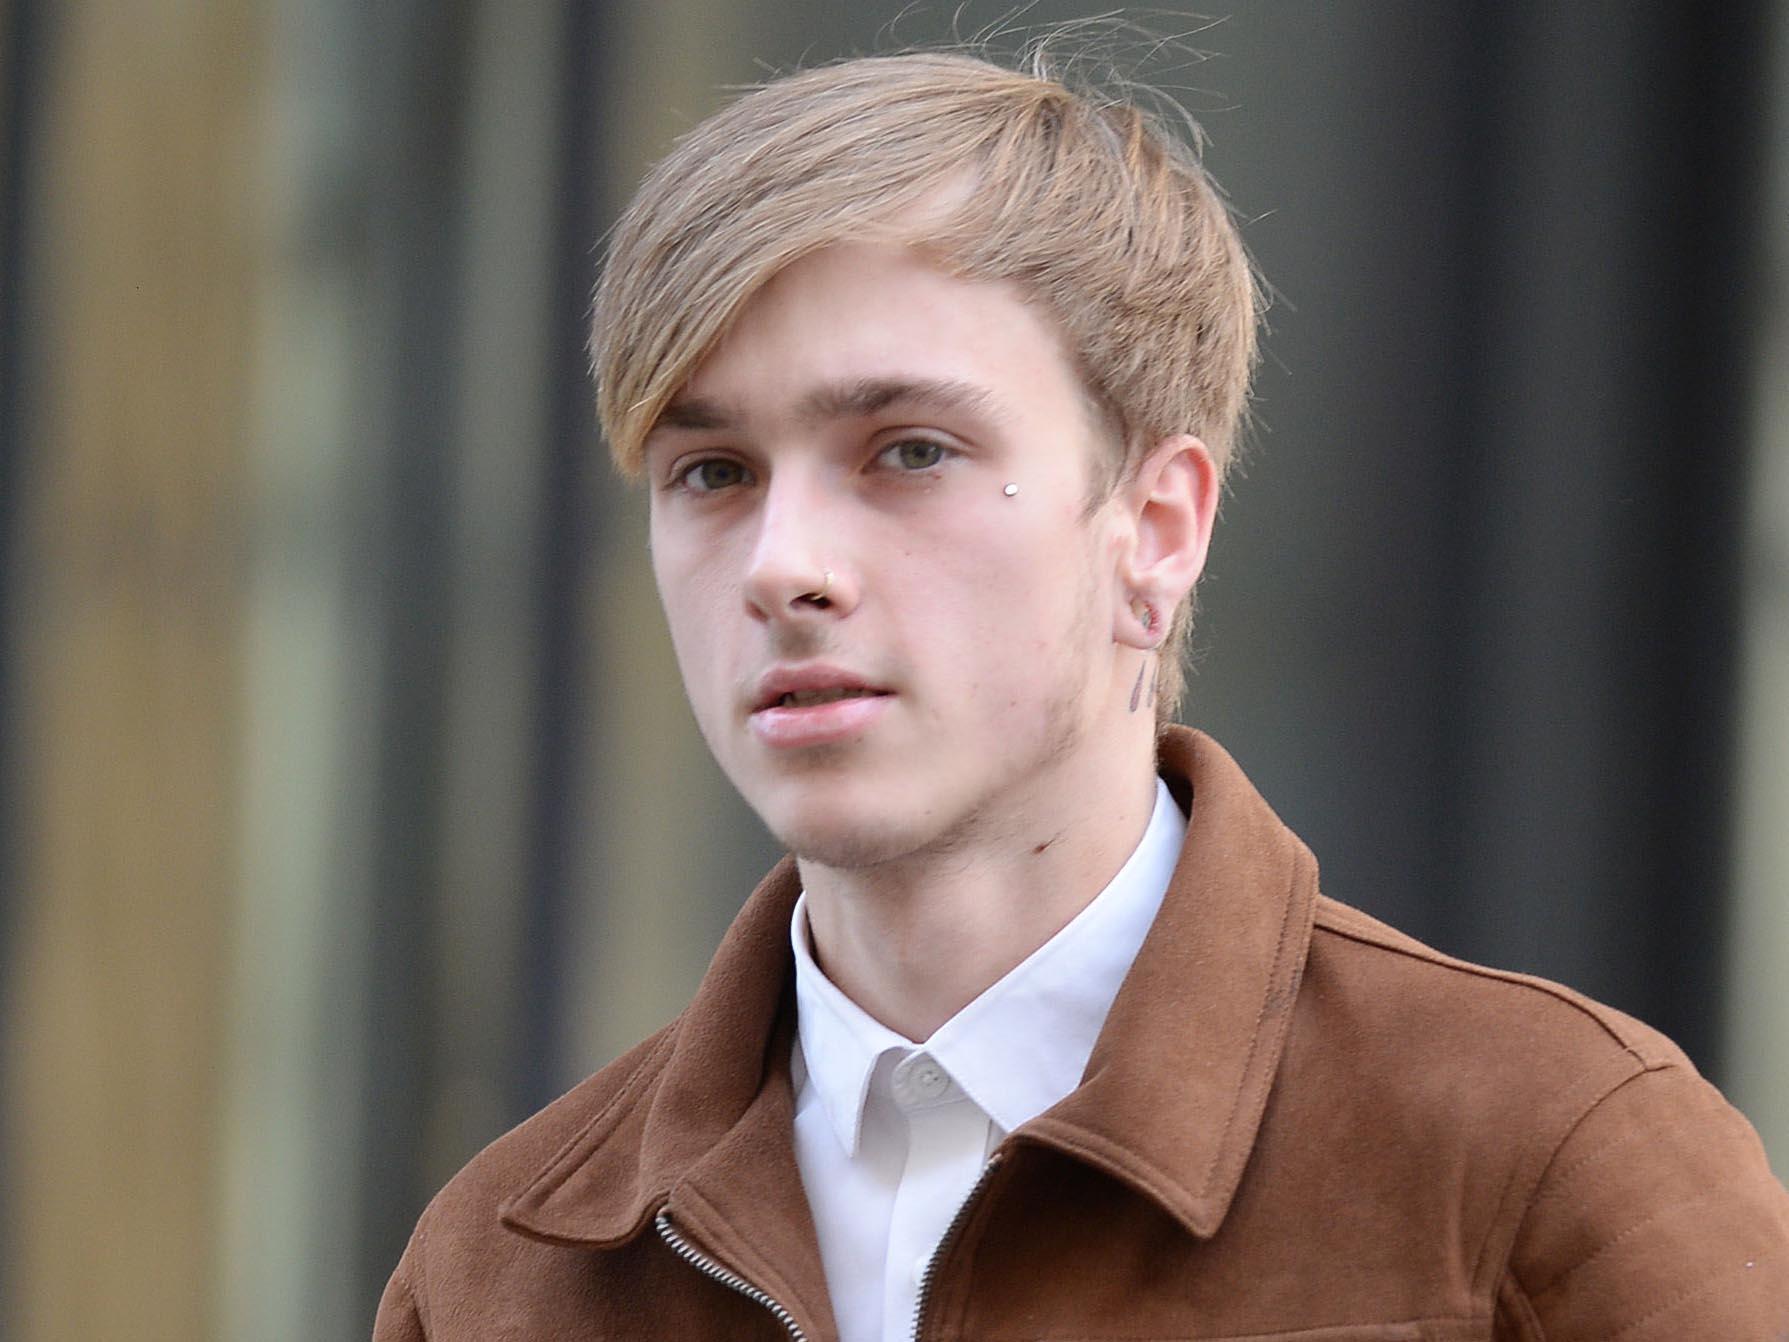 Charlie Alliston, 20, arrives at the Old Bailey in London, where he is accused of running over and killing mother-of-two Kim Briggs in Old Street, east London, on February 12 last year